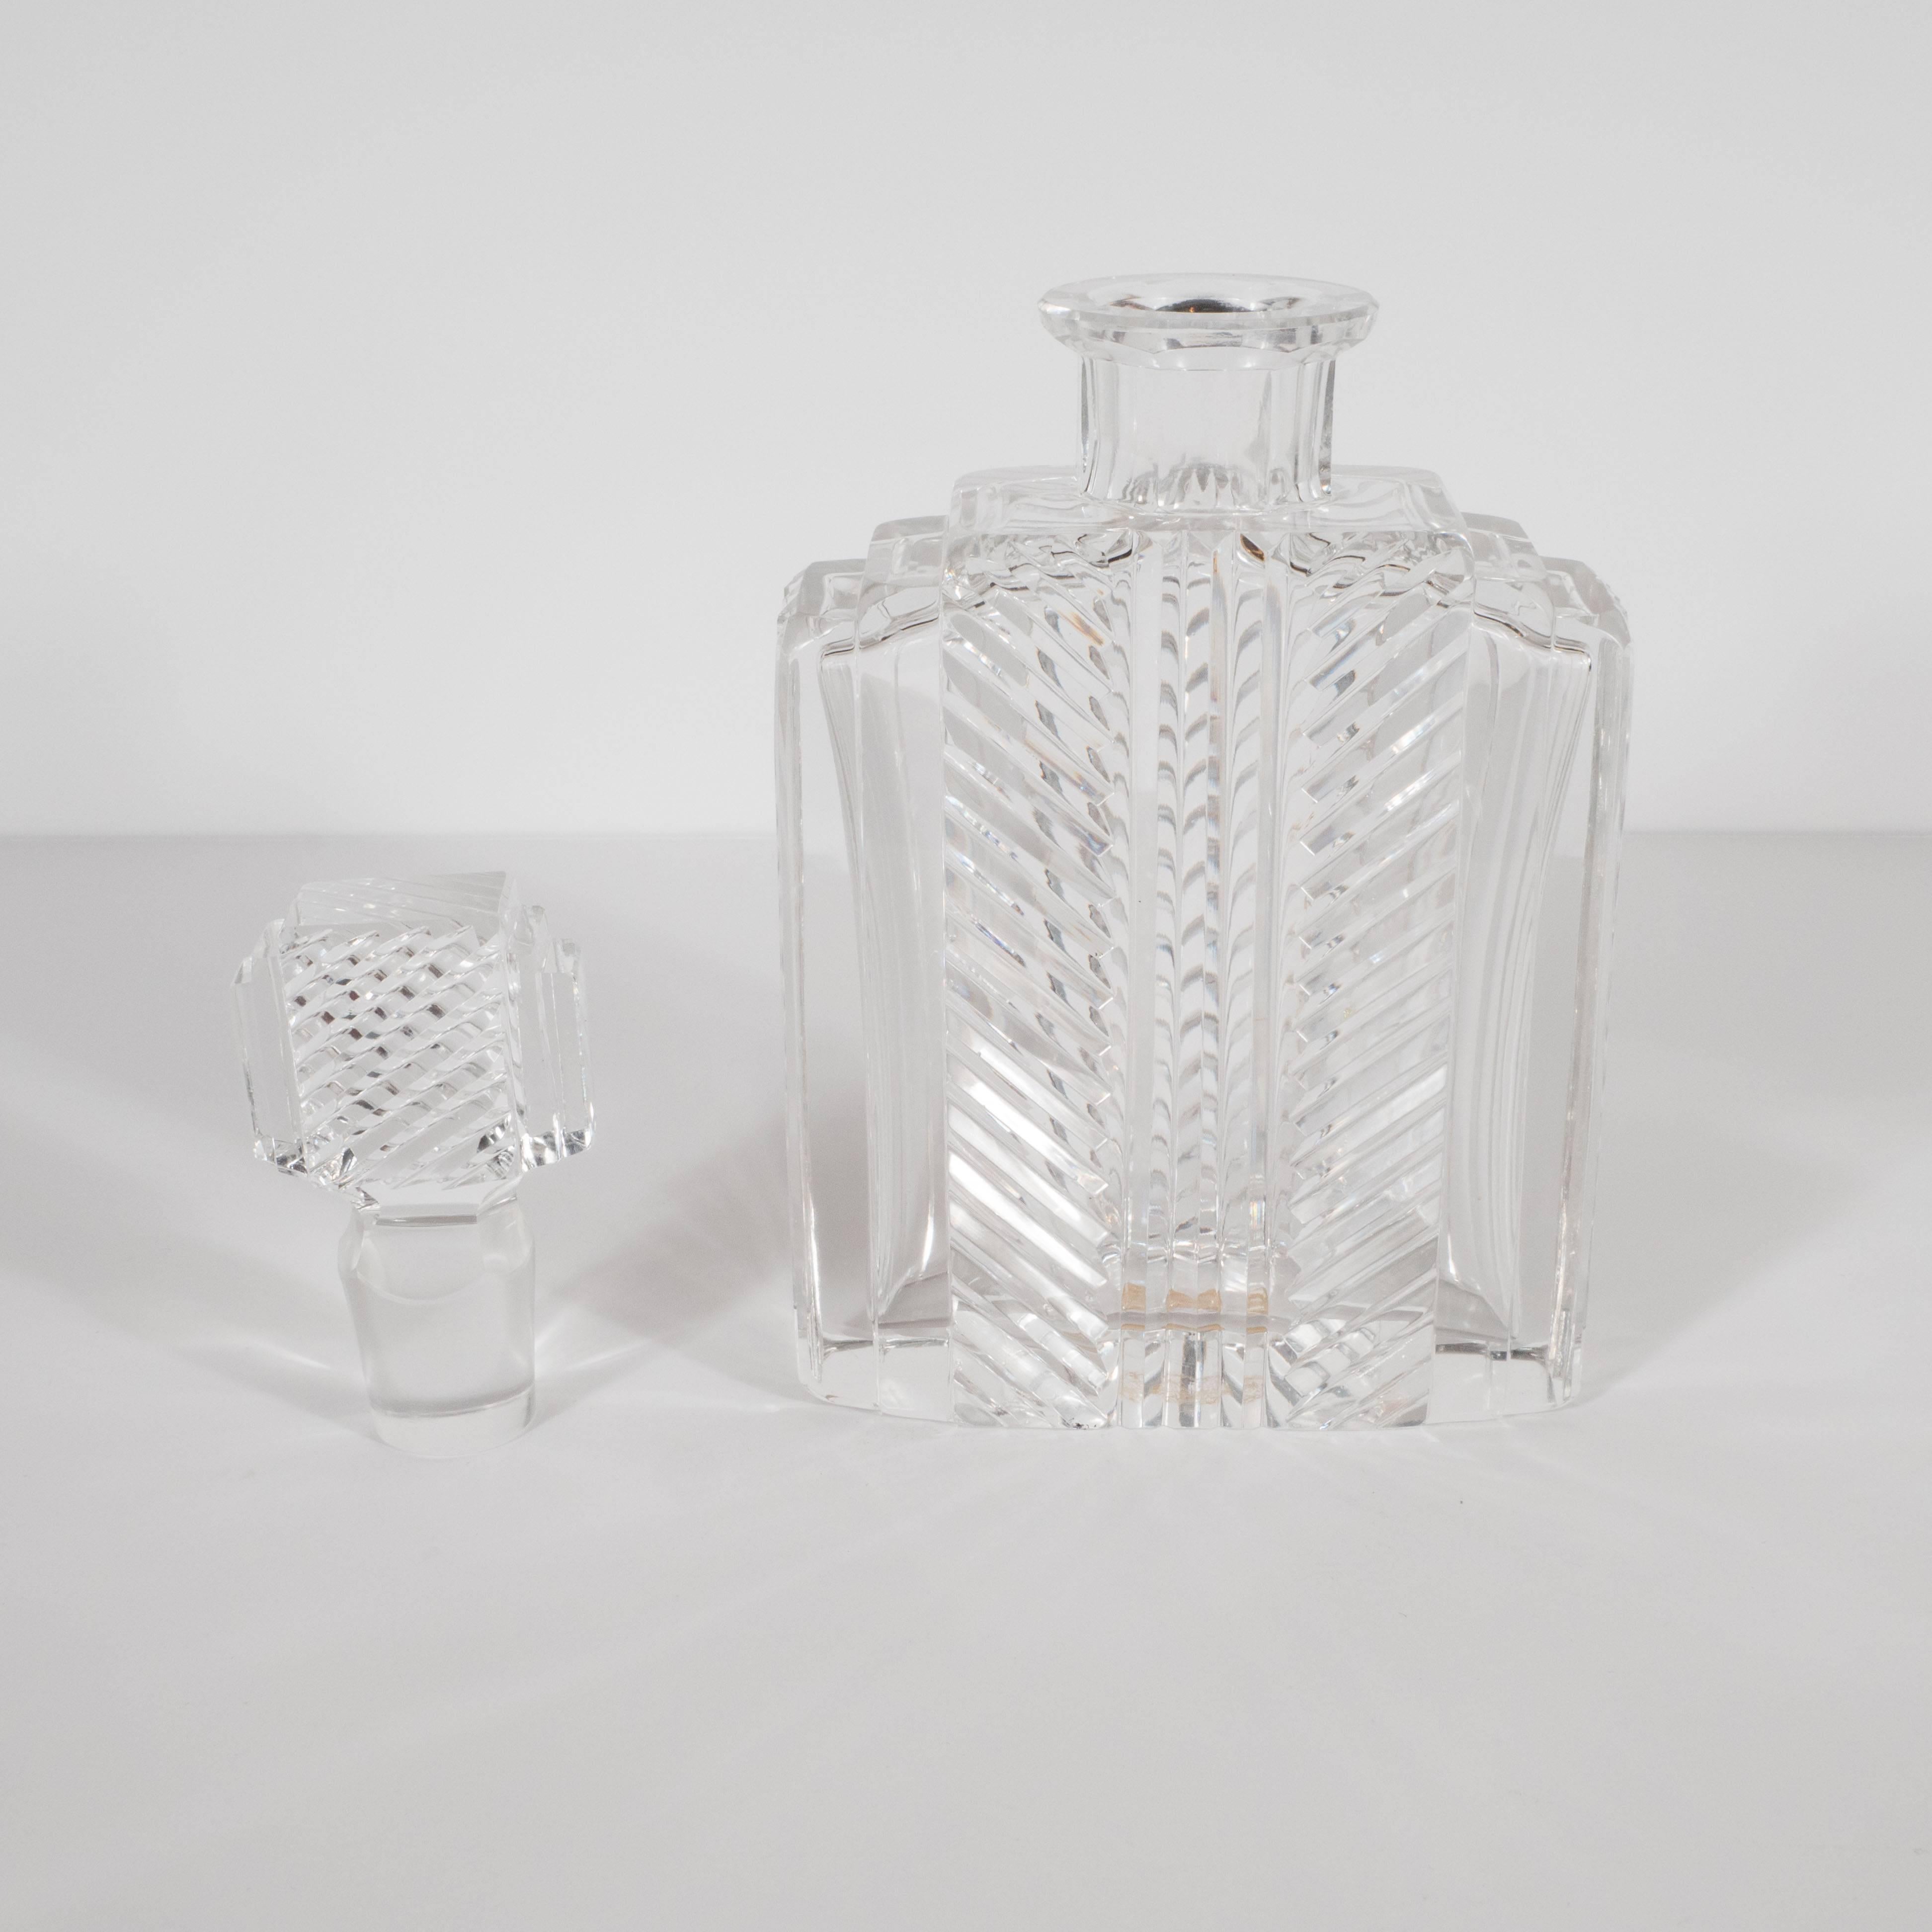 Exquisite Skyscraper Style Crystal Art Deco Hand-Cut & Beveled Crystal Decanter 1